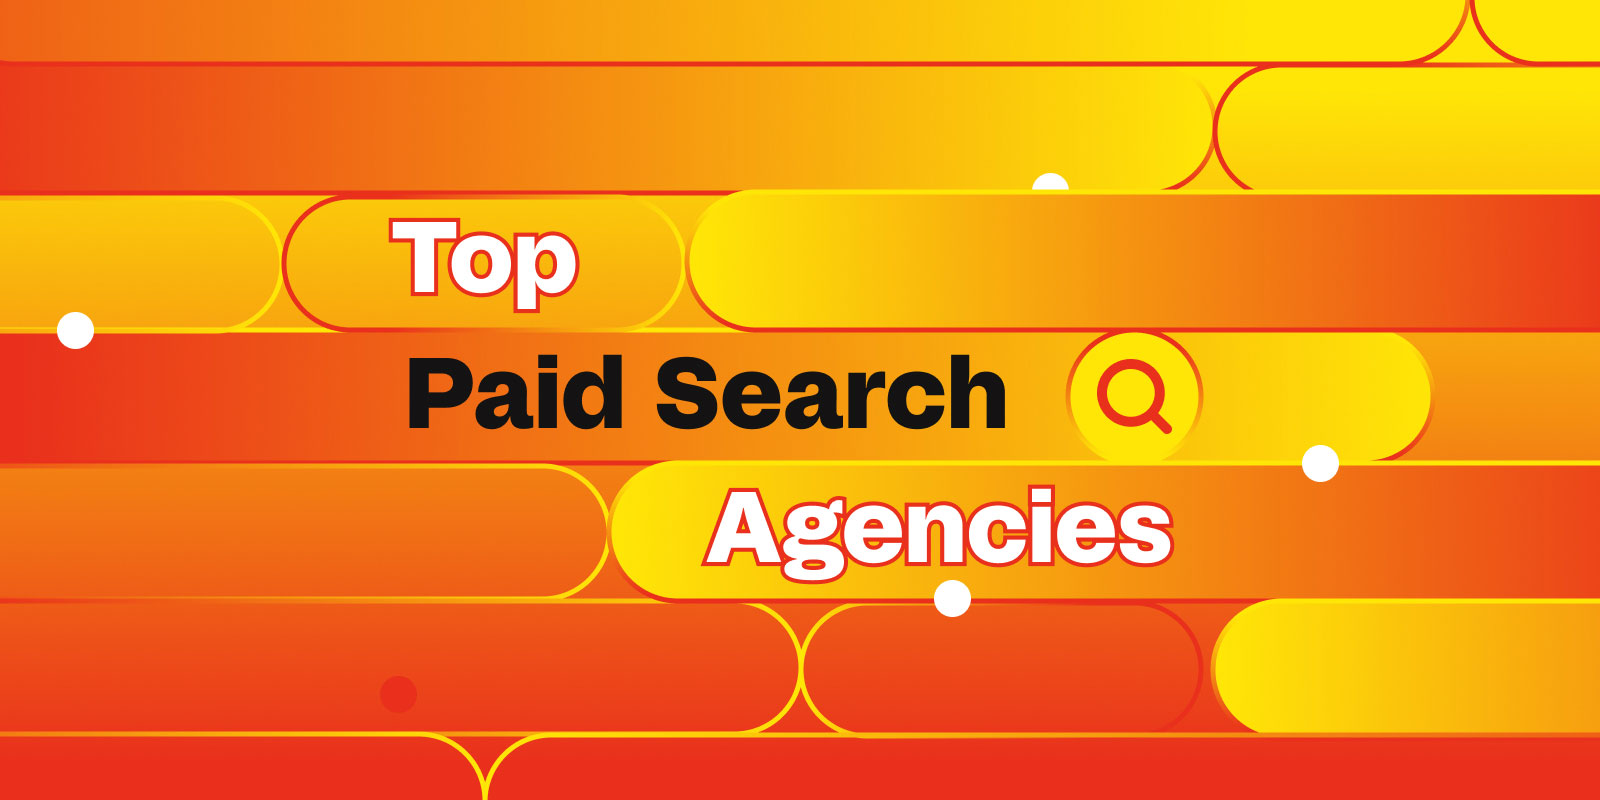 Top Paid Search Agencies